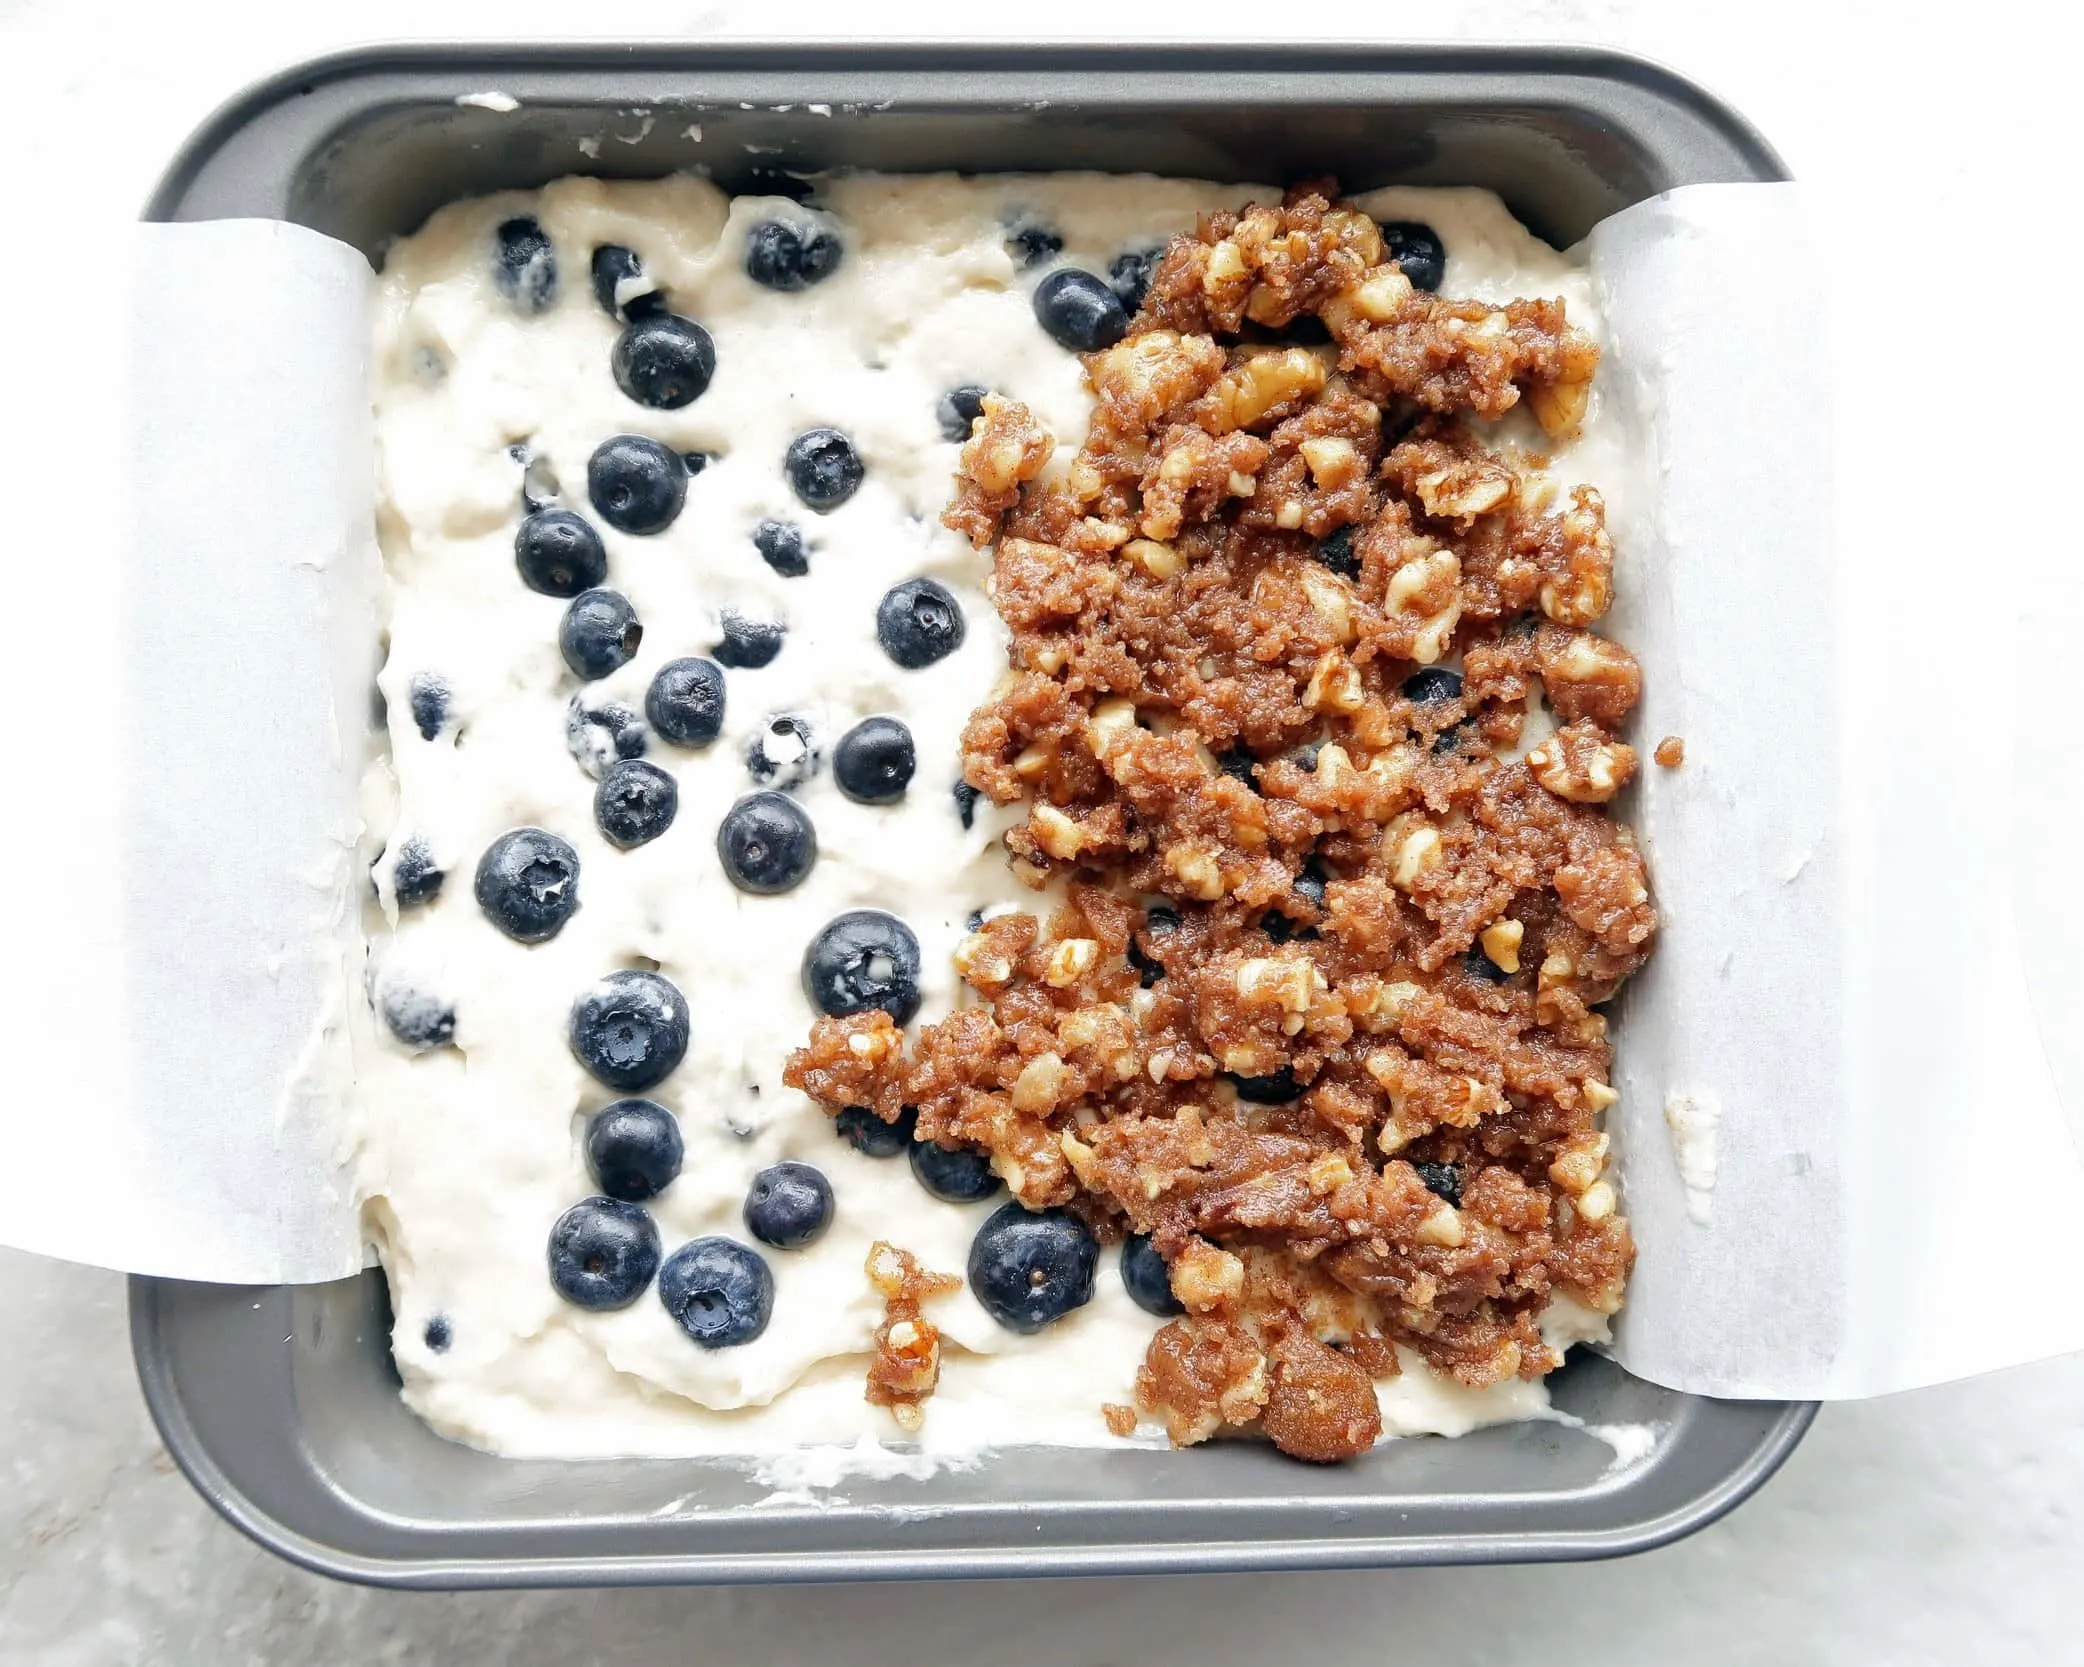 Blueberry coffee cake batter with a brown sugar-walnut crumble in a square baking pan.